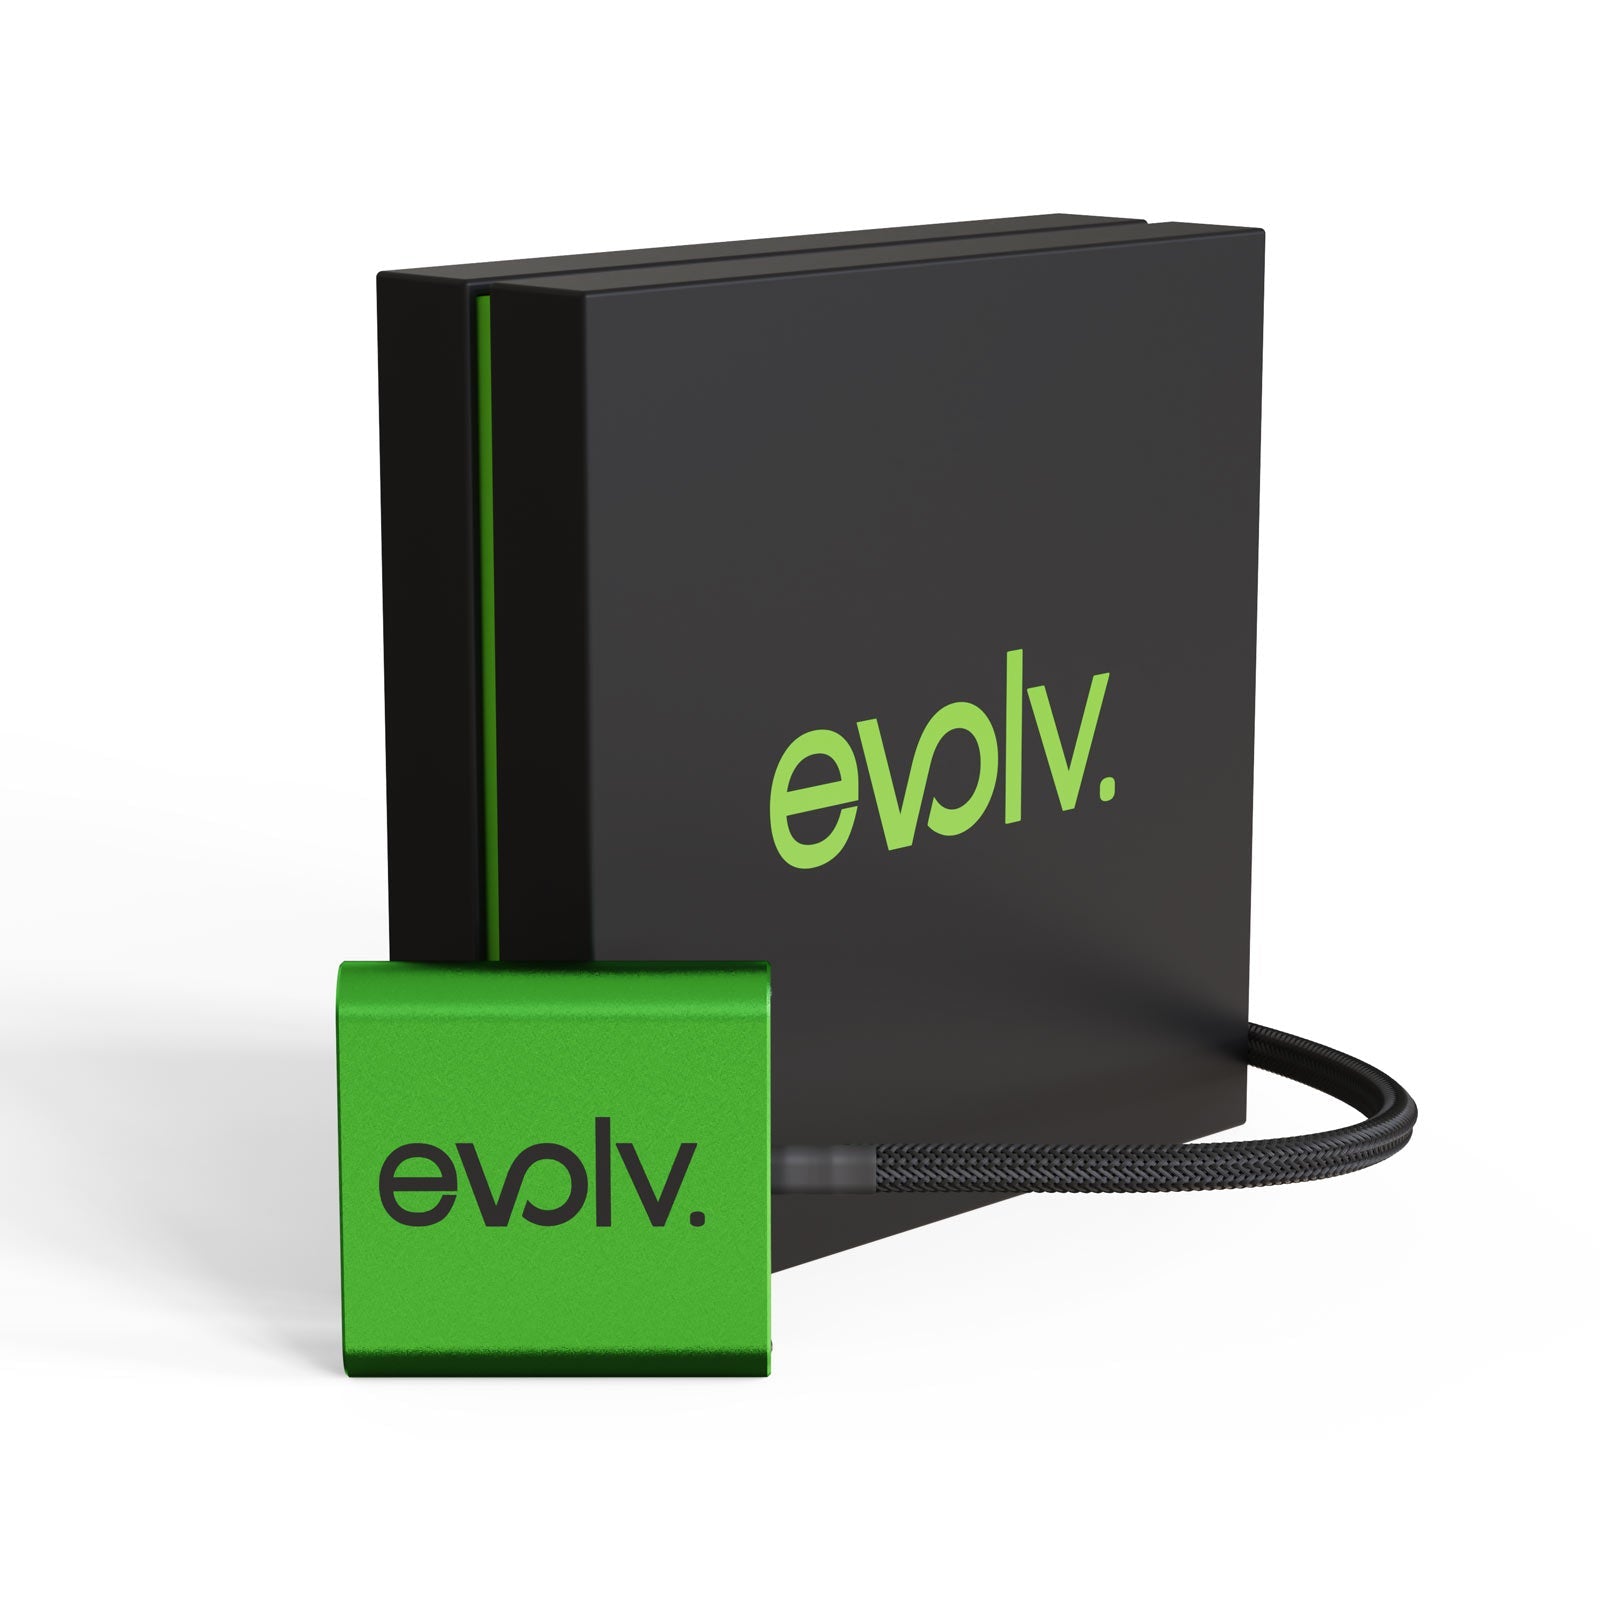 Increase your fuel mileage, performance and throttle response with an Evolv Ram 5500 Performance Chip!